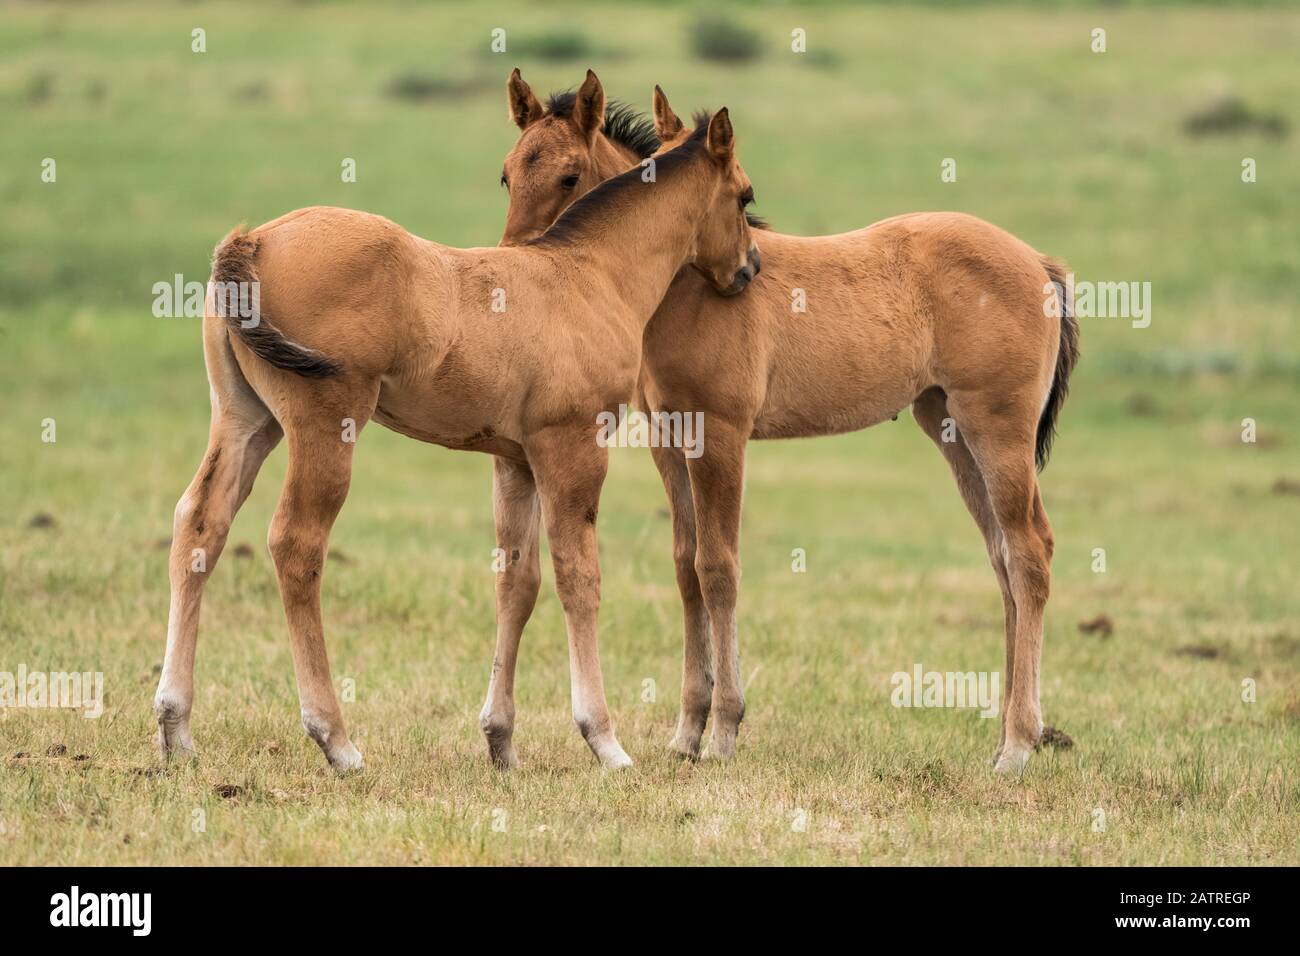 Two horses (Equus ferus caballus) standing side by side with necks touching to show affection; Saskatchewan, Canada Stock Photo